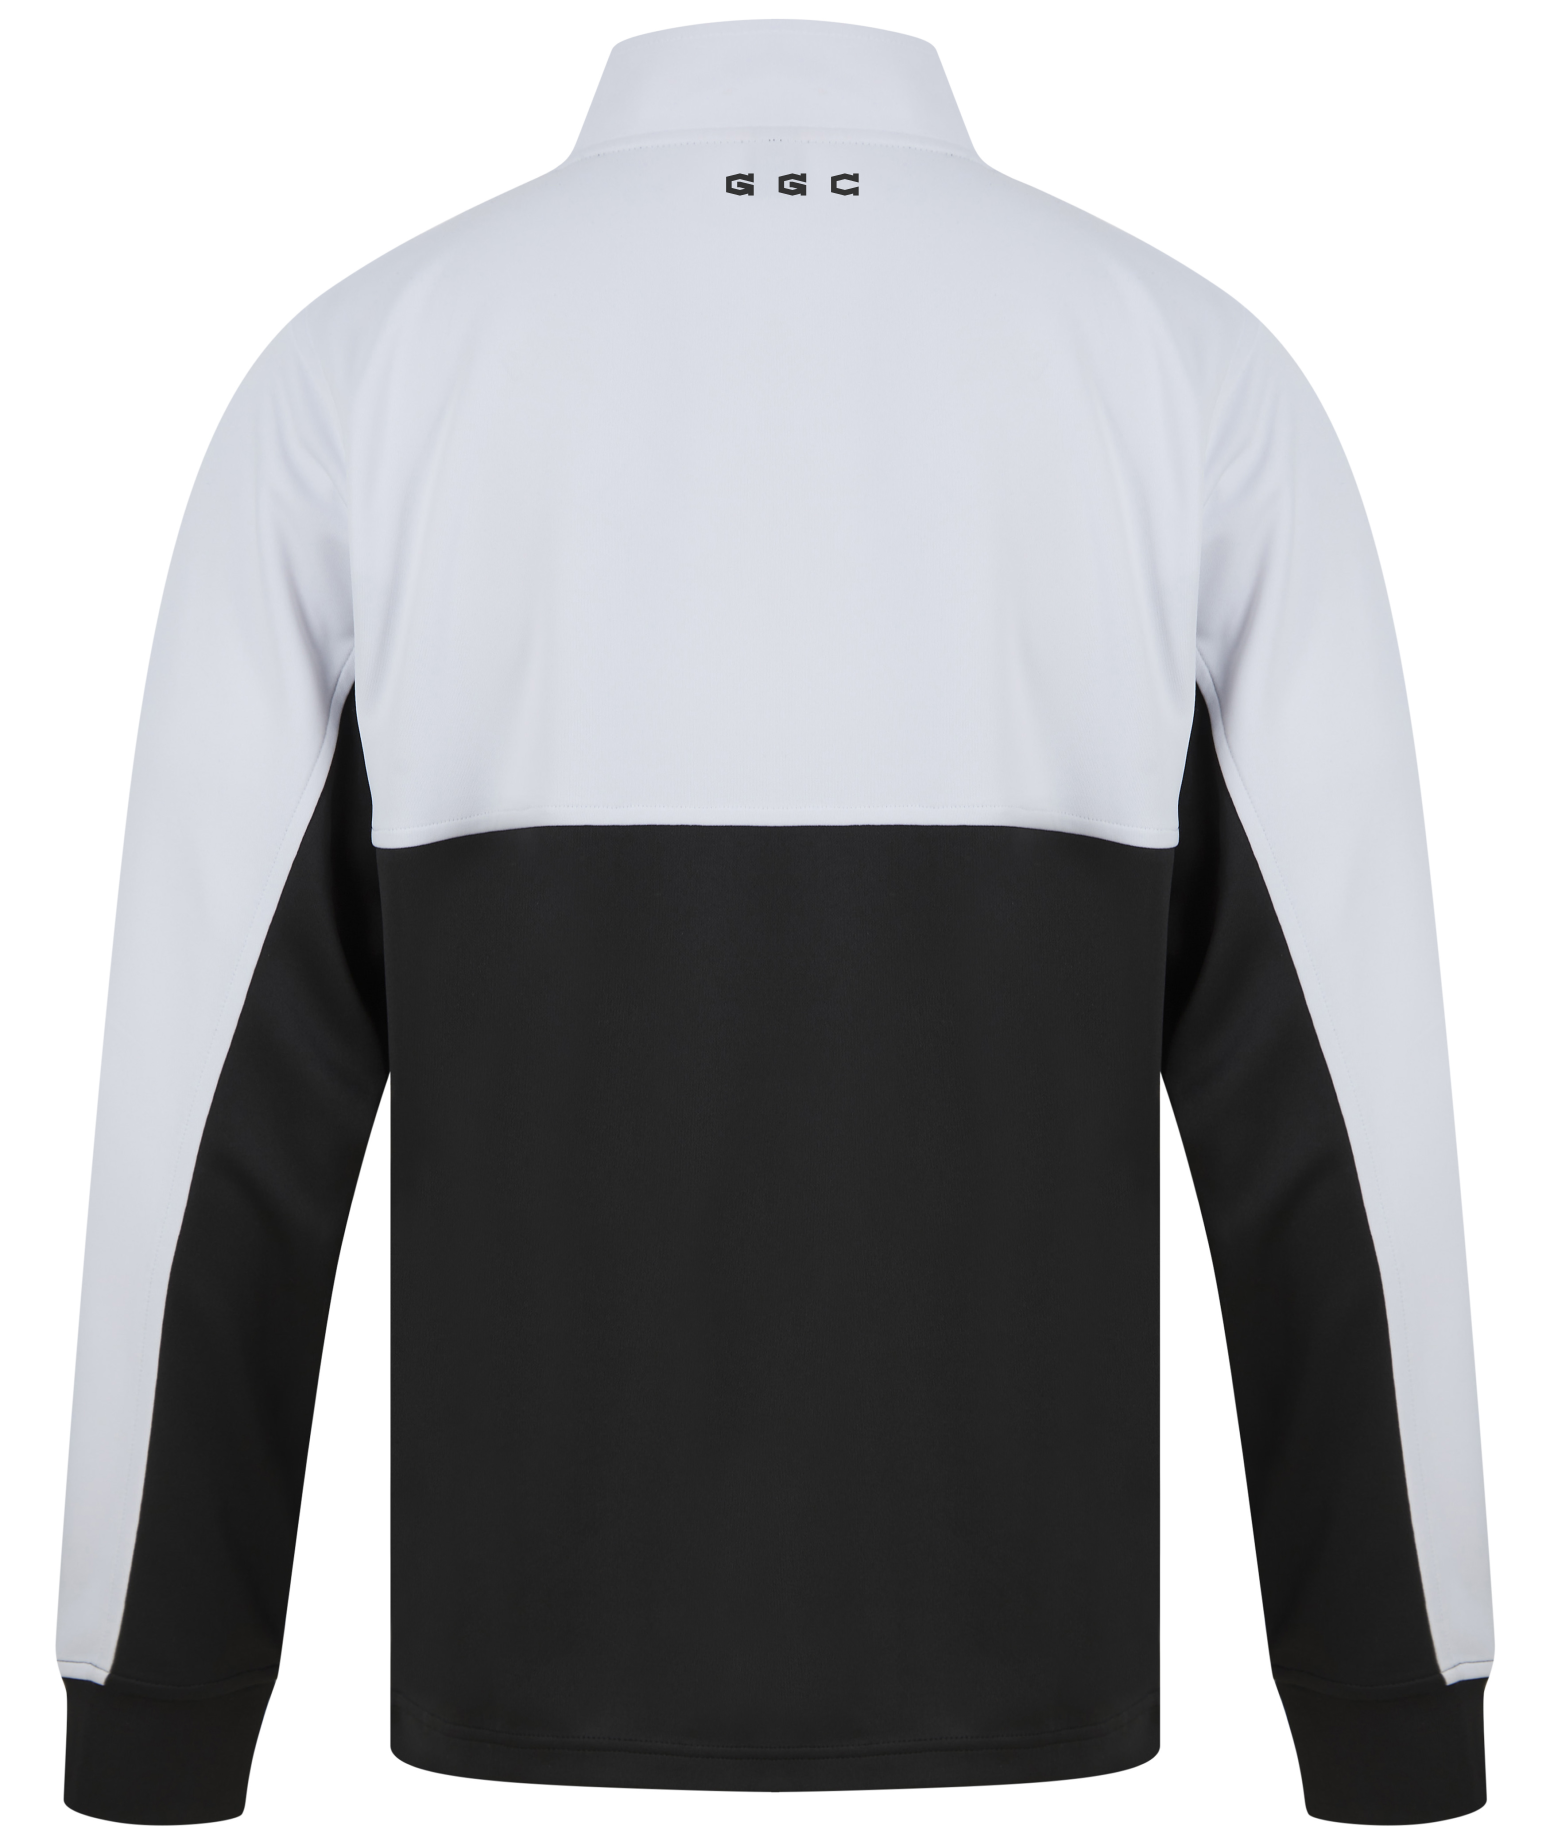 Crossed Clubs Black & White 1/4 Zip Pullover